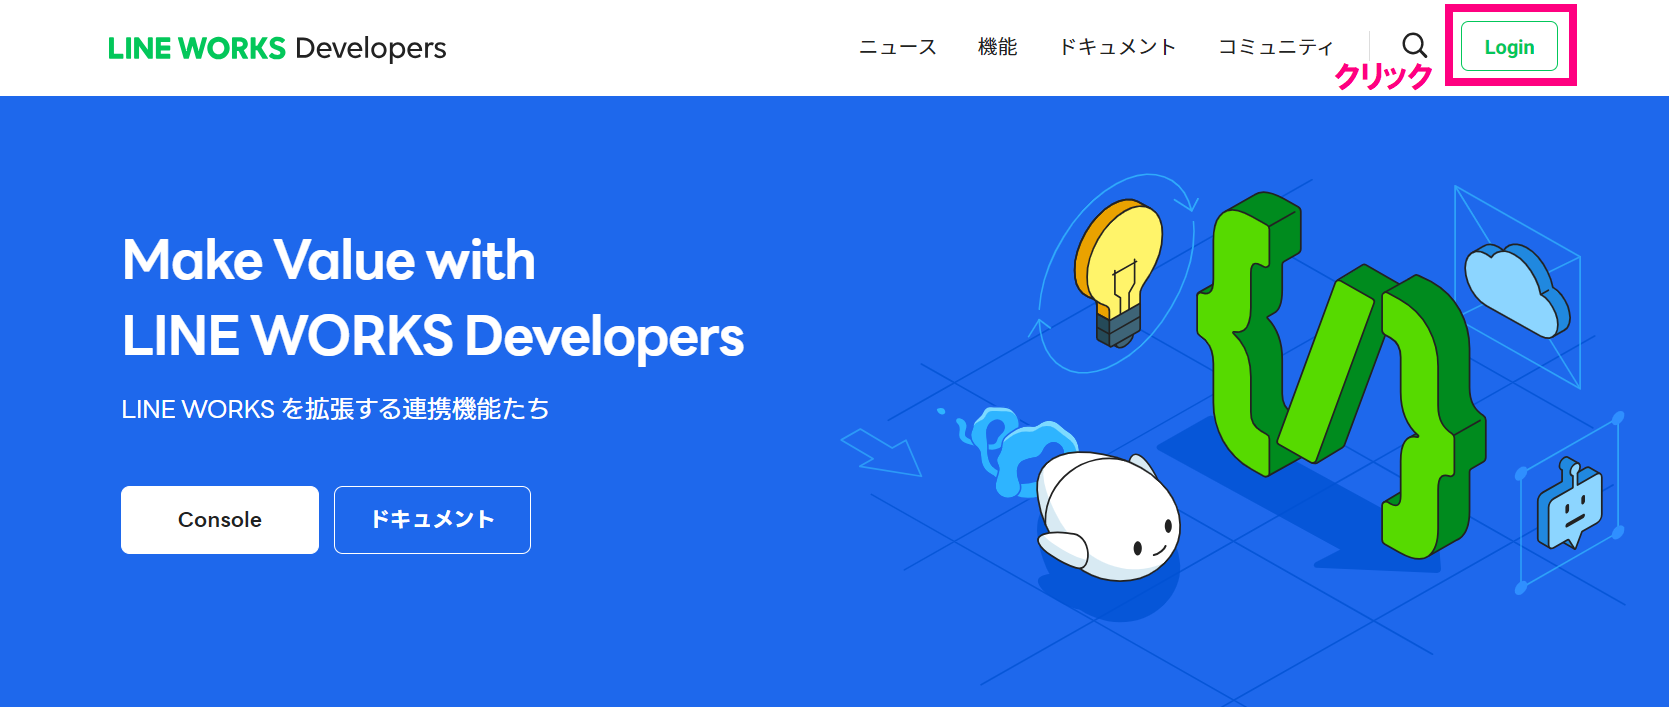 step2_LINE WORKS Developersログイン.png